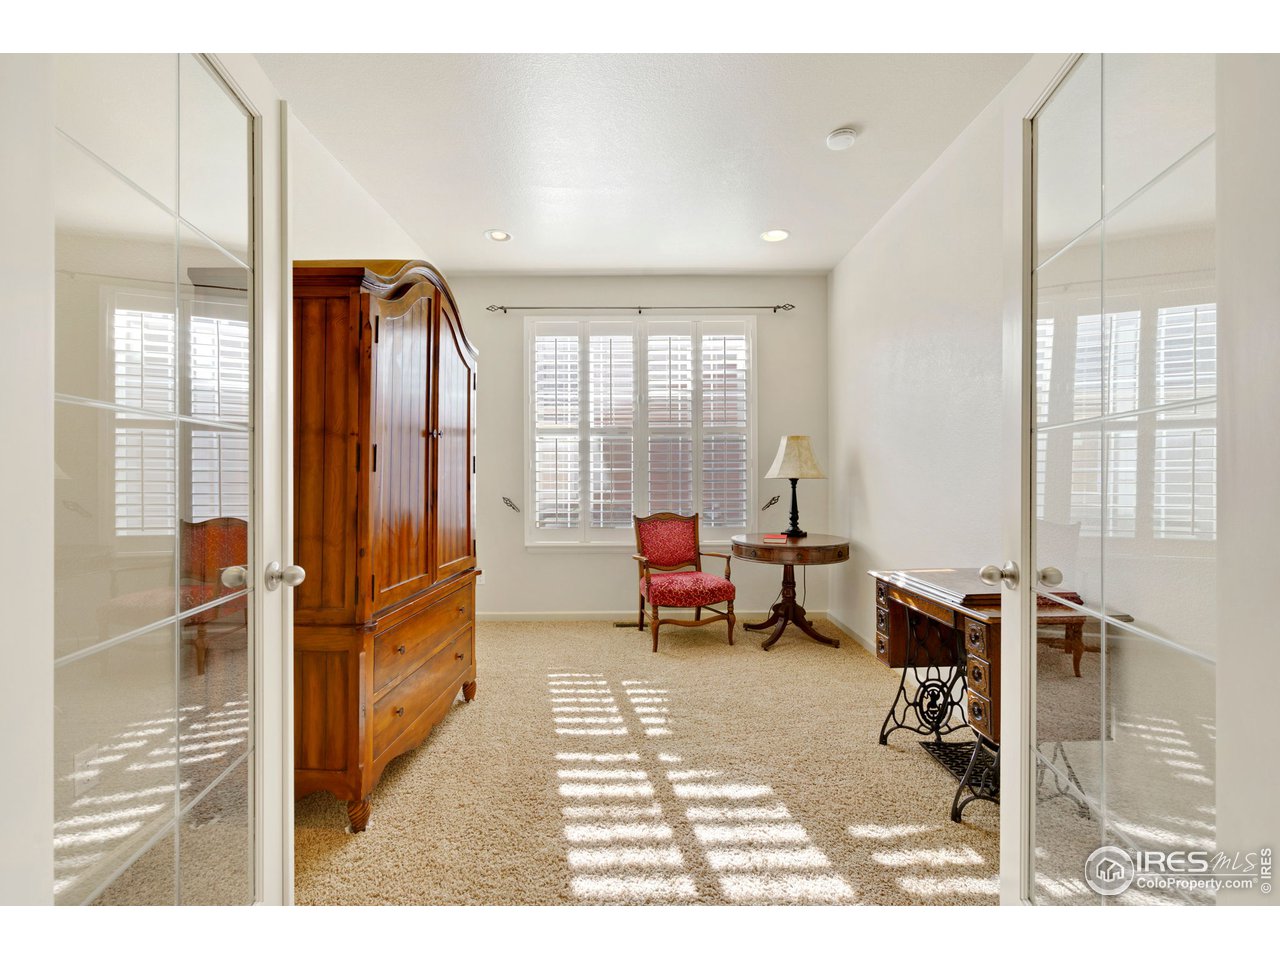 Great study / office on the main floor - armoire can stay!